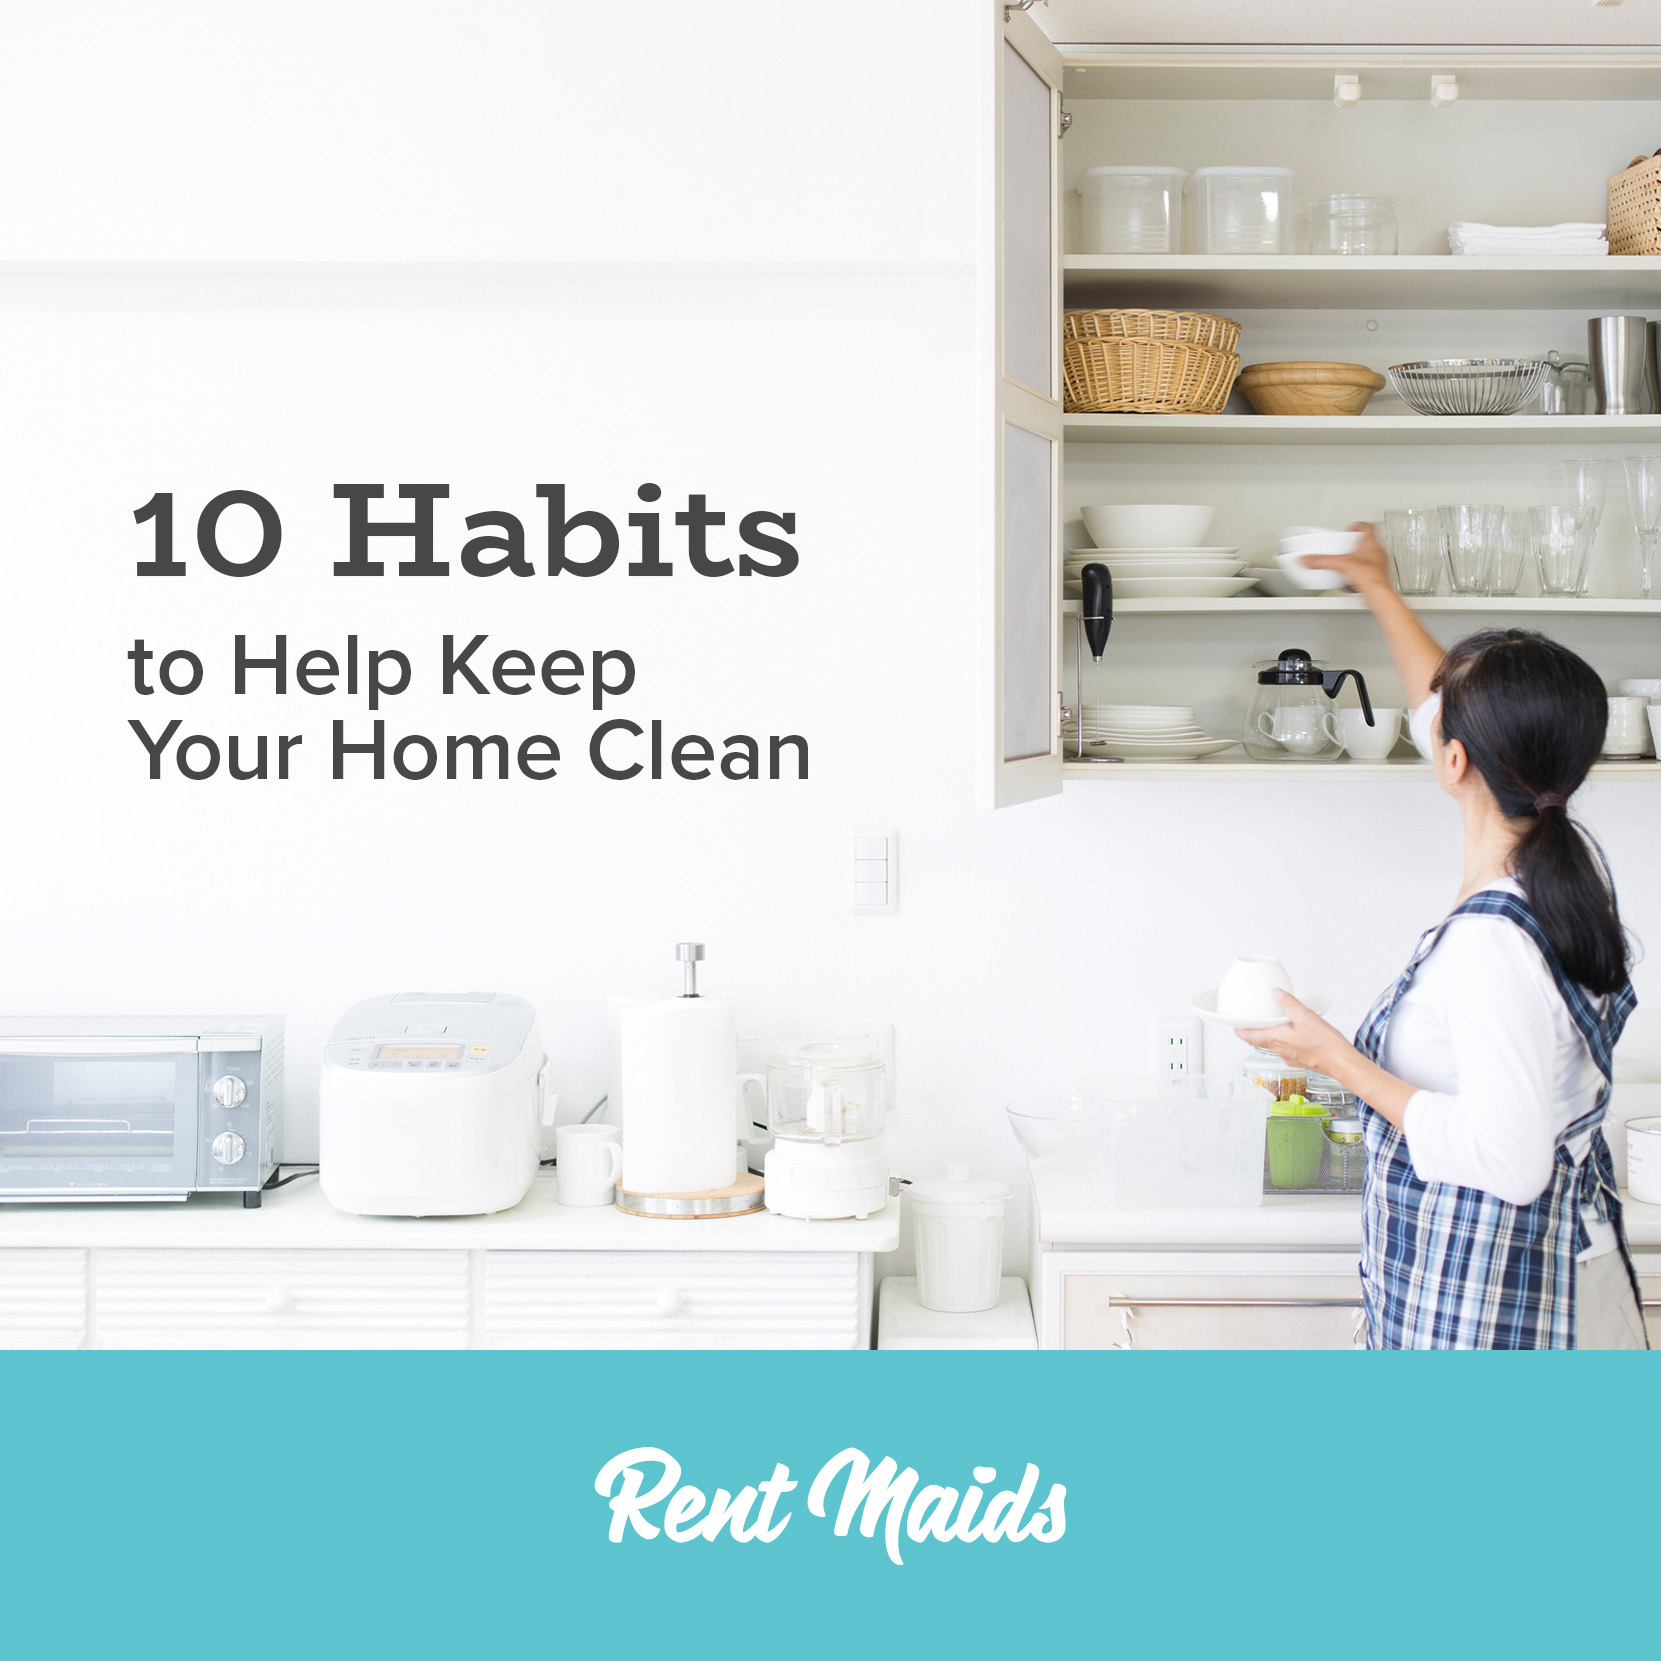 10 habits to help keep your home clean